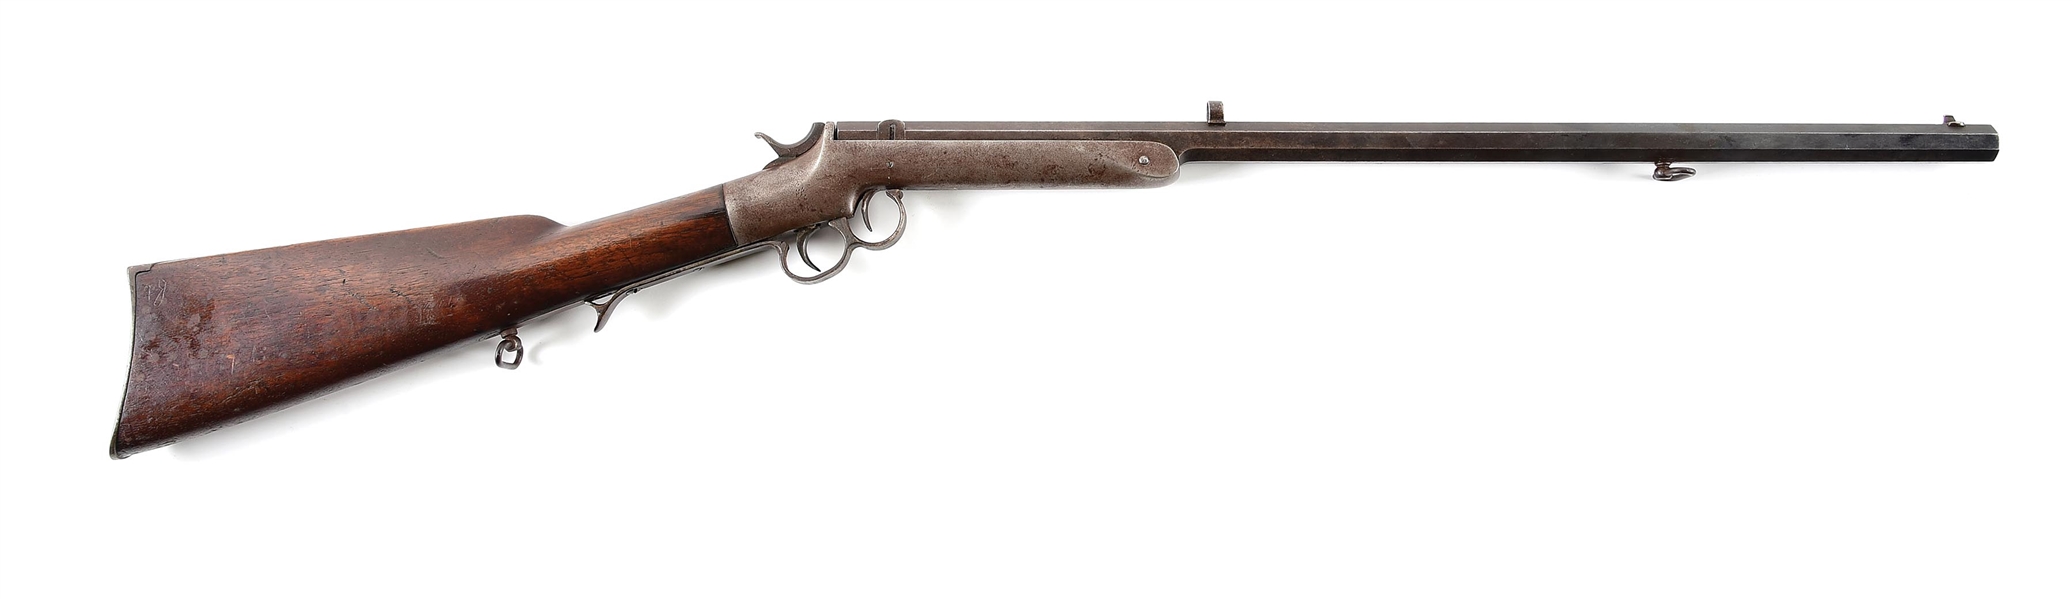 (A) KITTREDGE & CO. MARKED FRANK WESSON TWO TRIGGER MILITARY CARBINE.